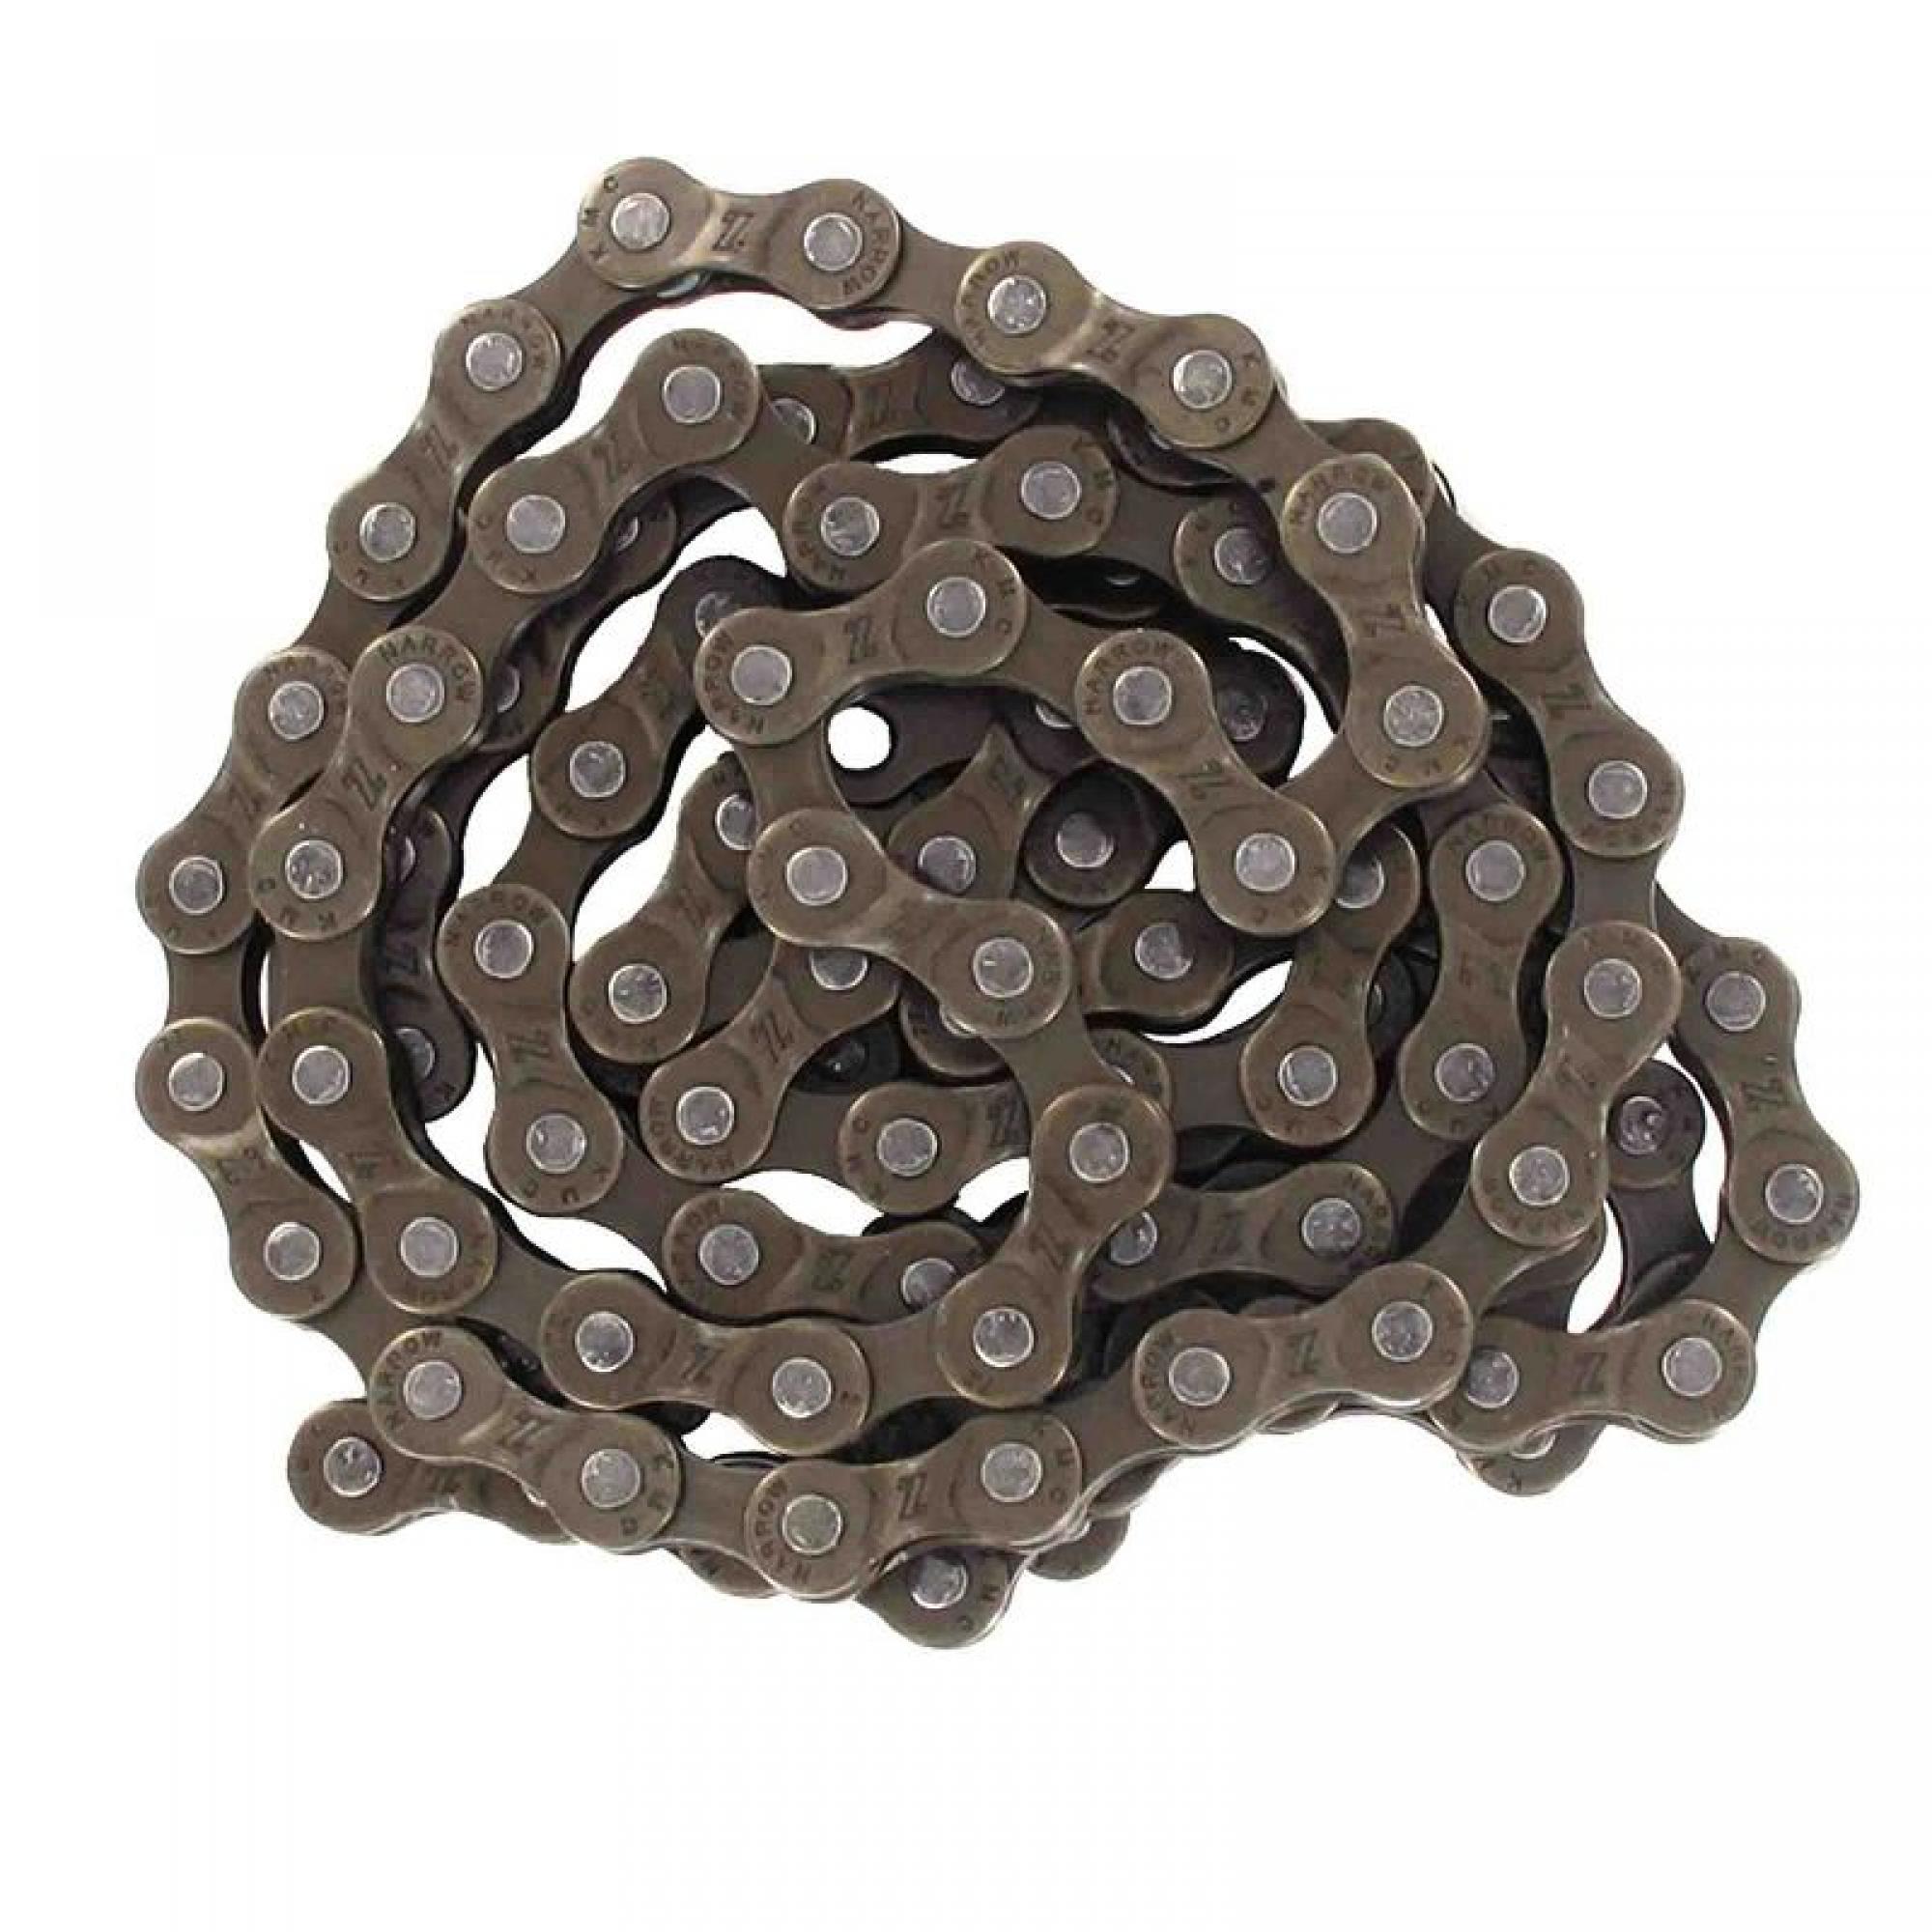 5 speed bicycle chain